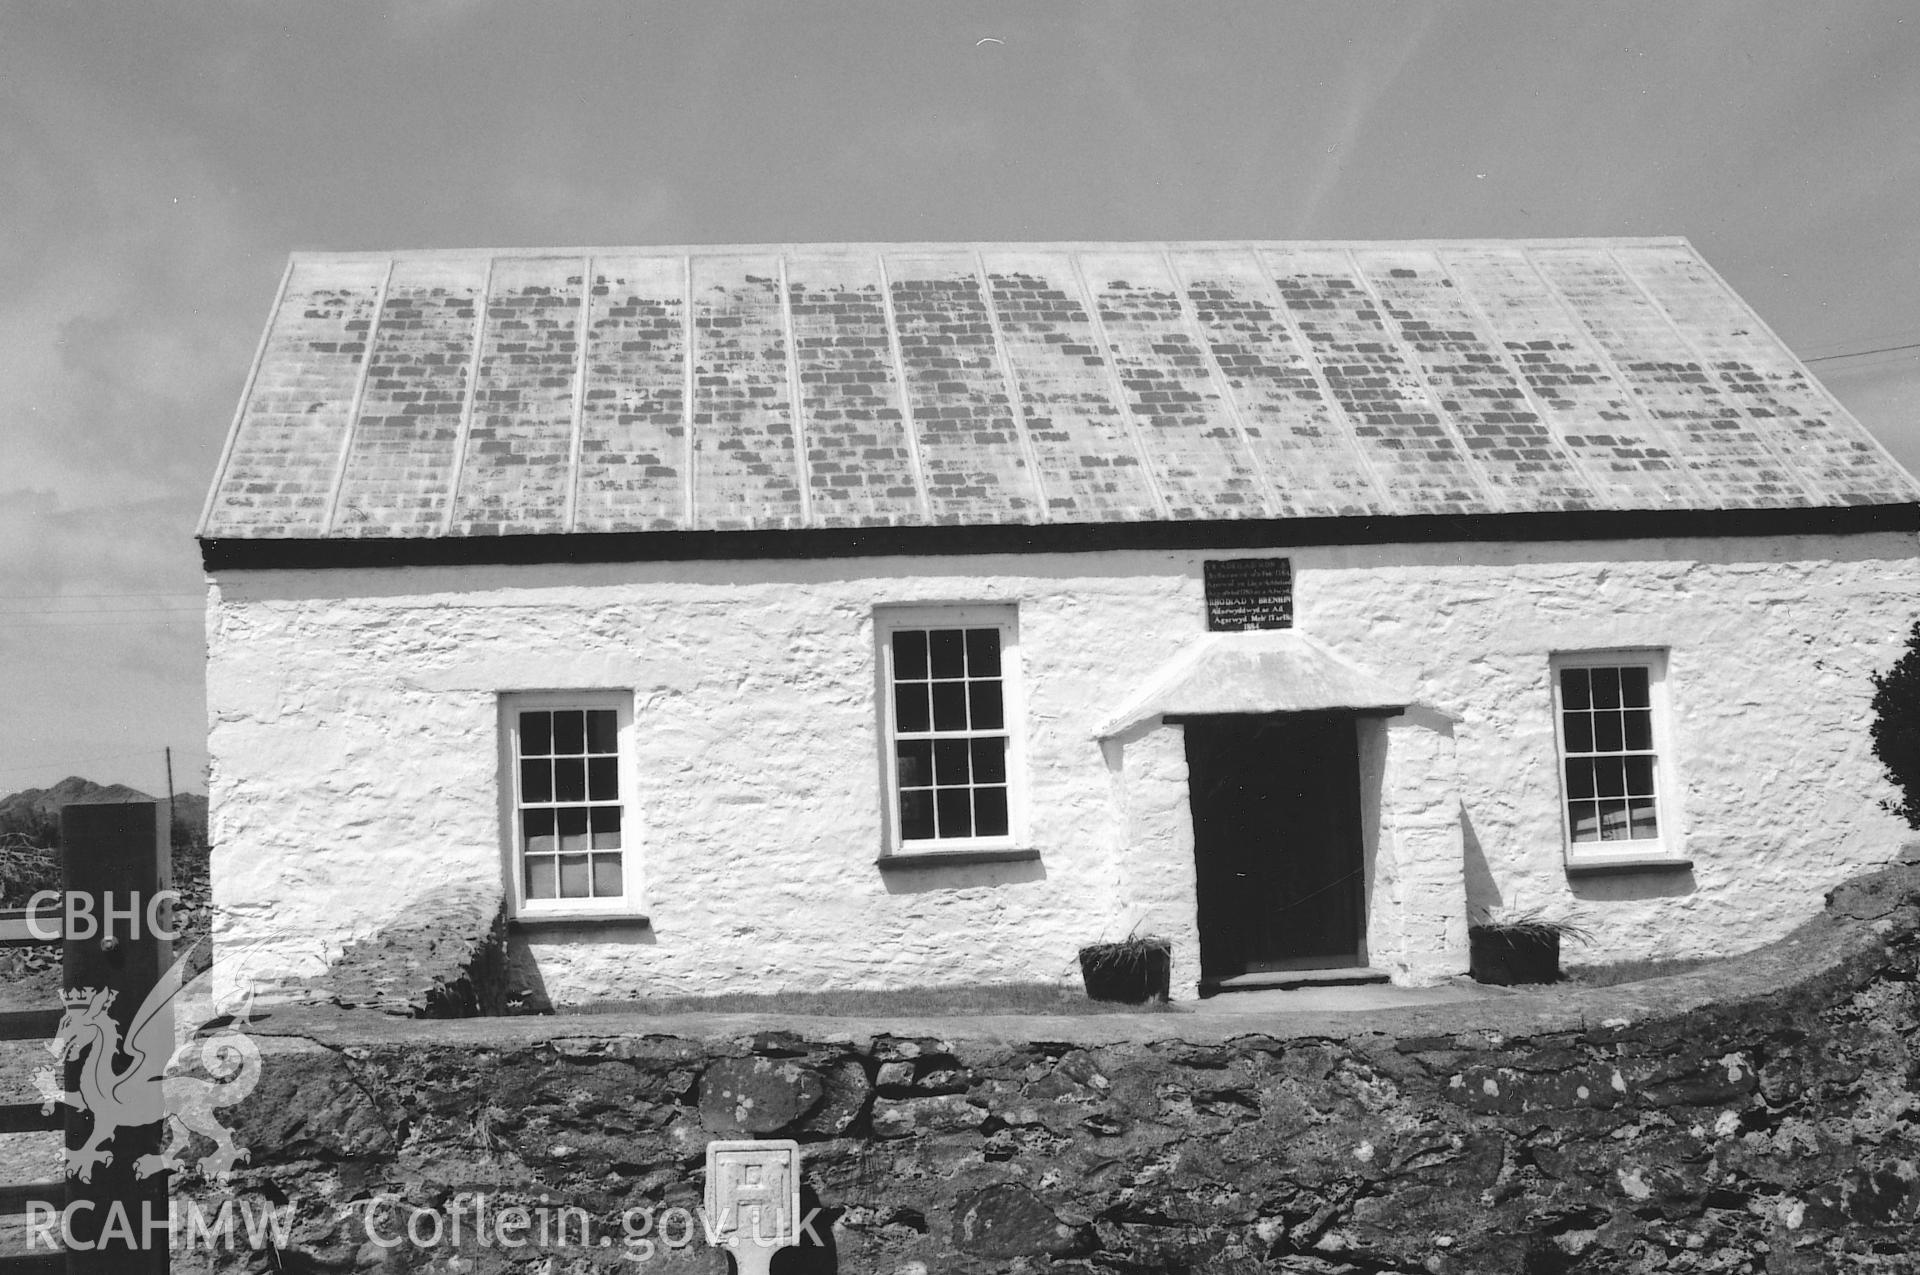 Digital copy of a black and white photograph showing an exterior view of Rhodiad yr Brenin Congregational Chapel, St David's,  taken by Robert Scourfield, 1995.